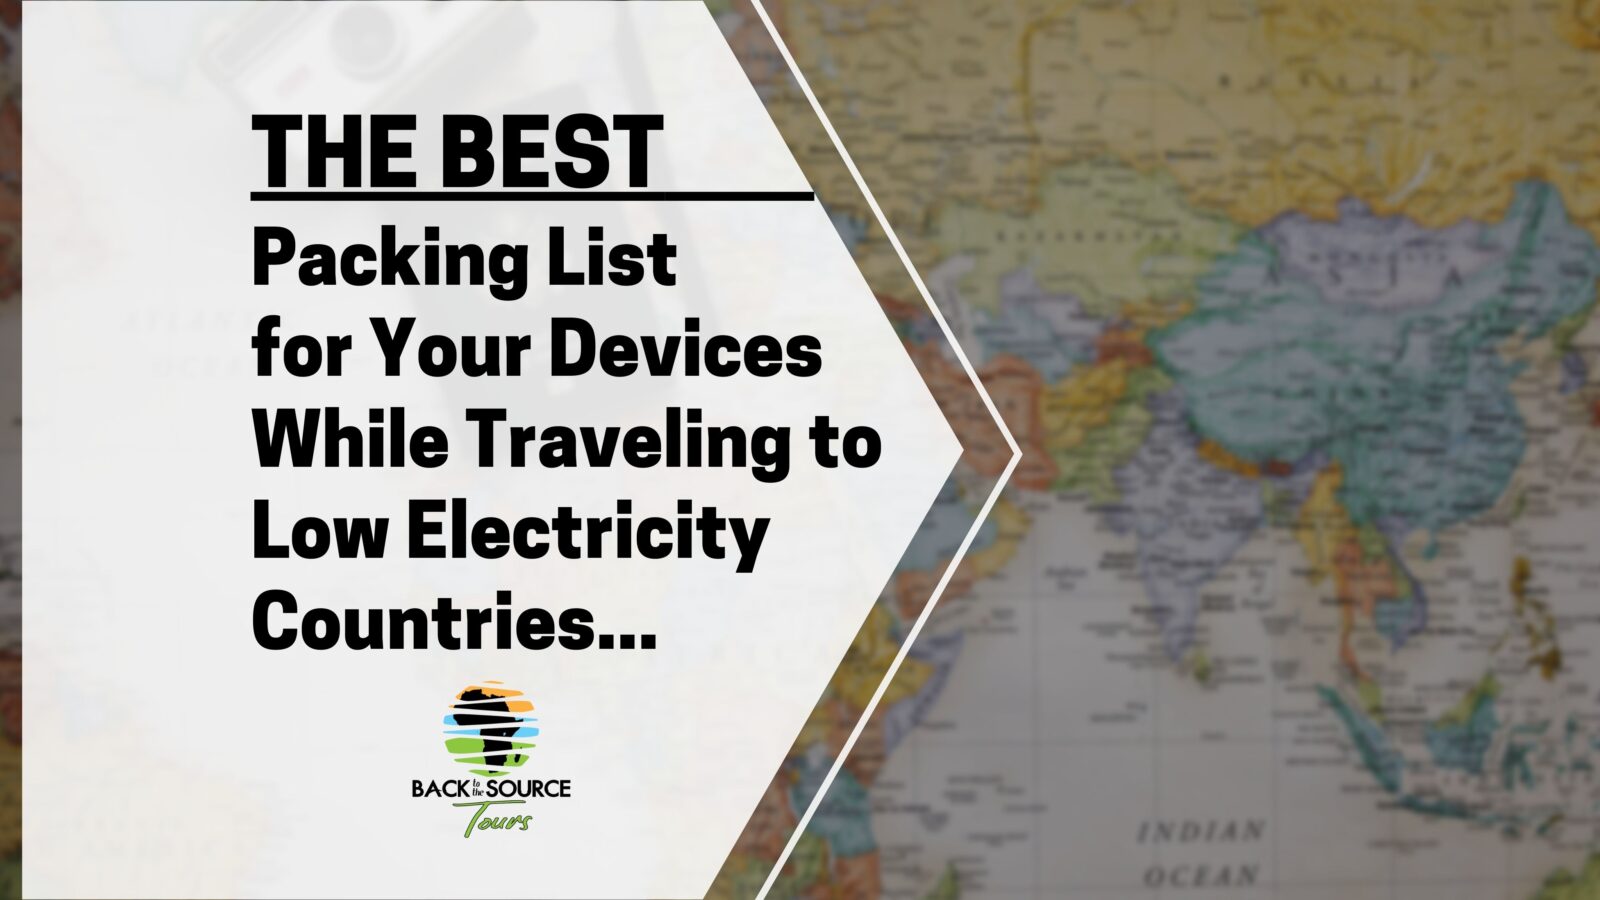 The Best Packing List for Your Devices Banner